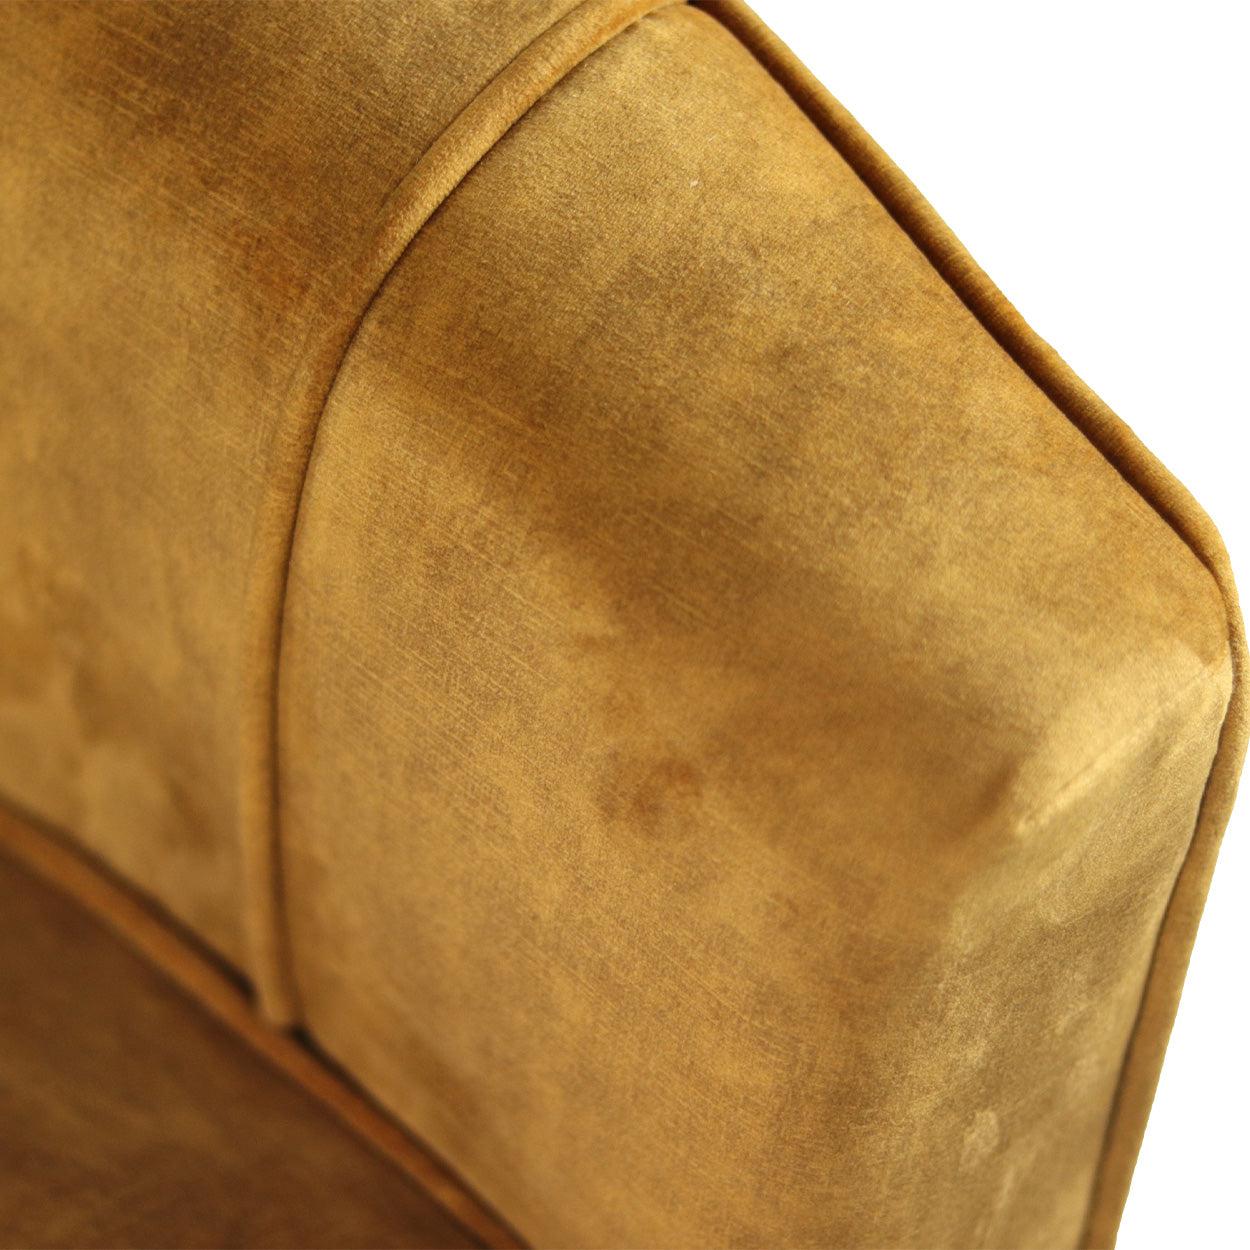 Chester Fauteuil Goud - House of Baboon - HSM Collection